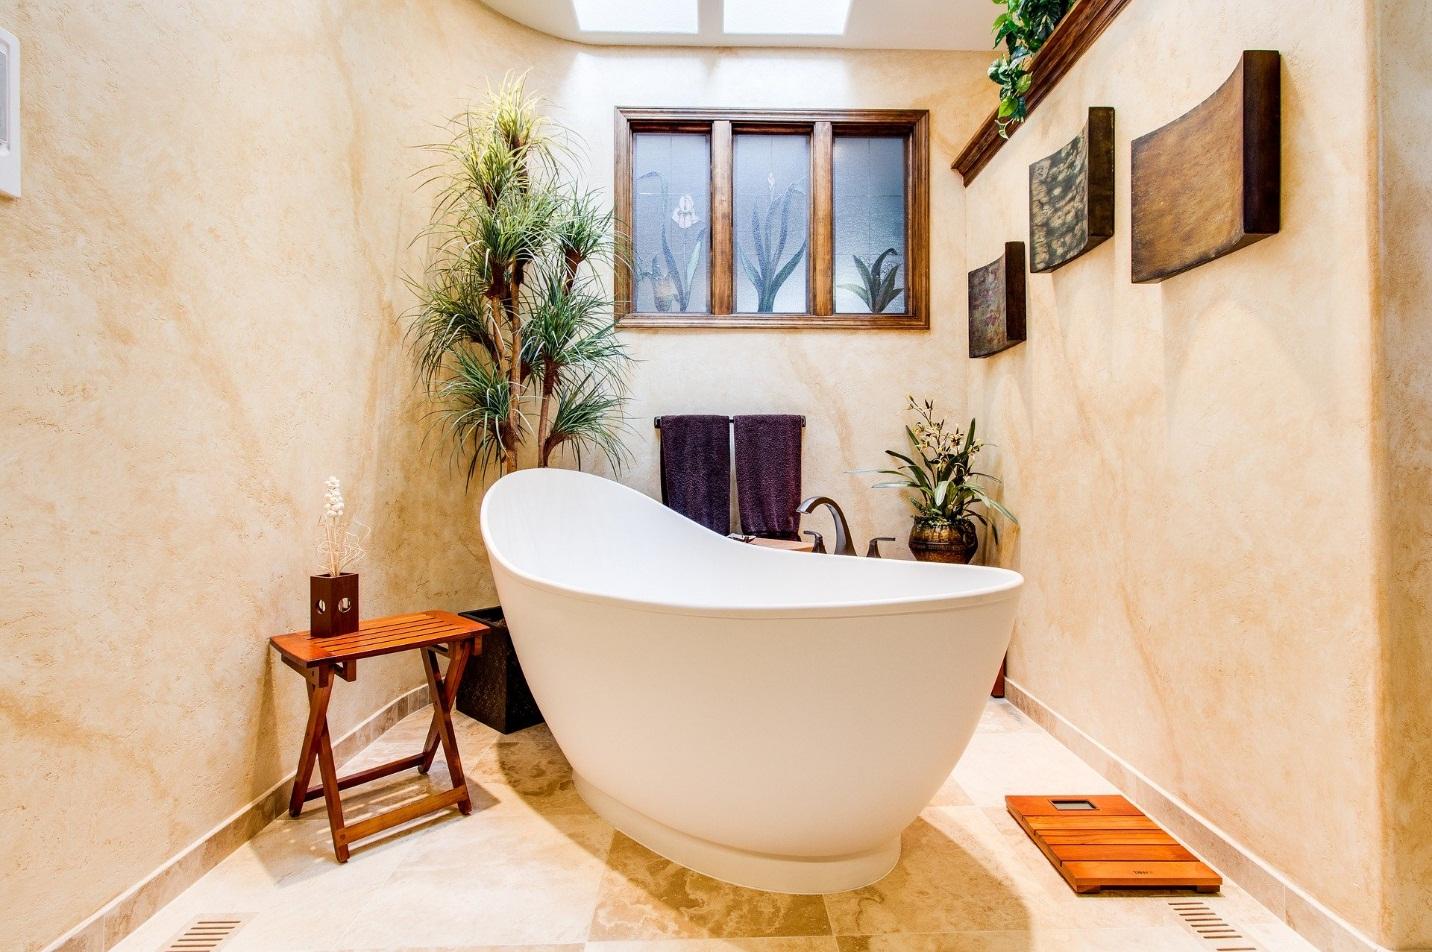 How to Shop for a Freestanding Bathtub